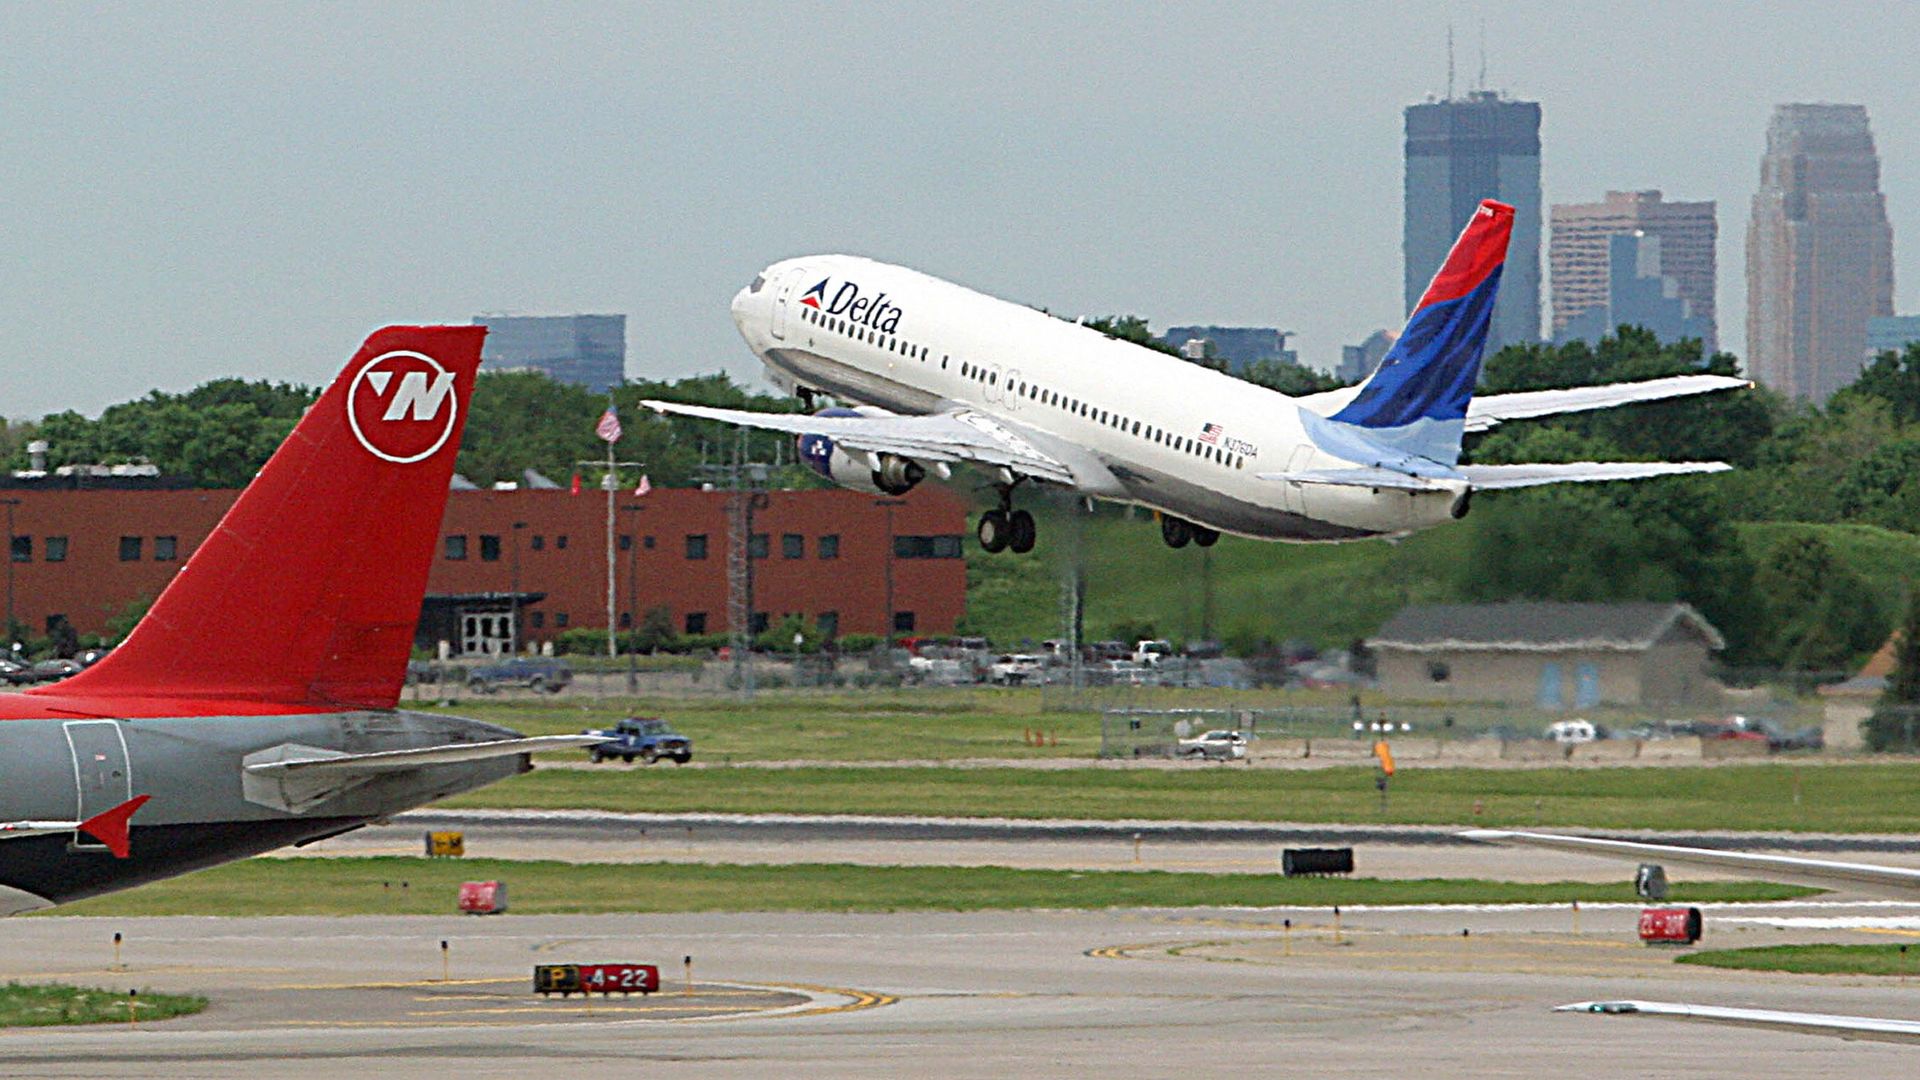 A Delta Airlines jet takes off at Minneapolis/St. Paul International Airport 30 May, 2006 in St.Paul, MN.